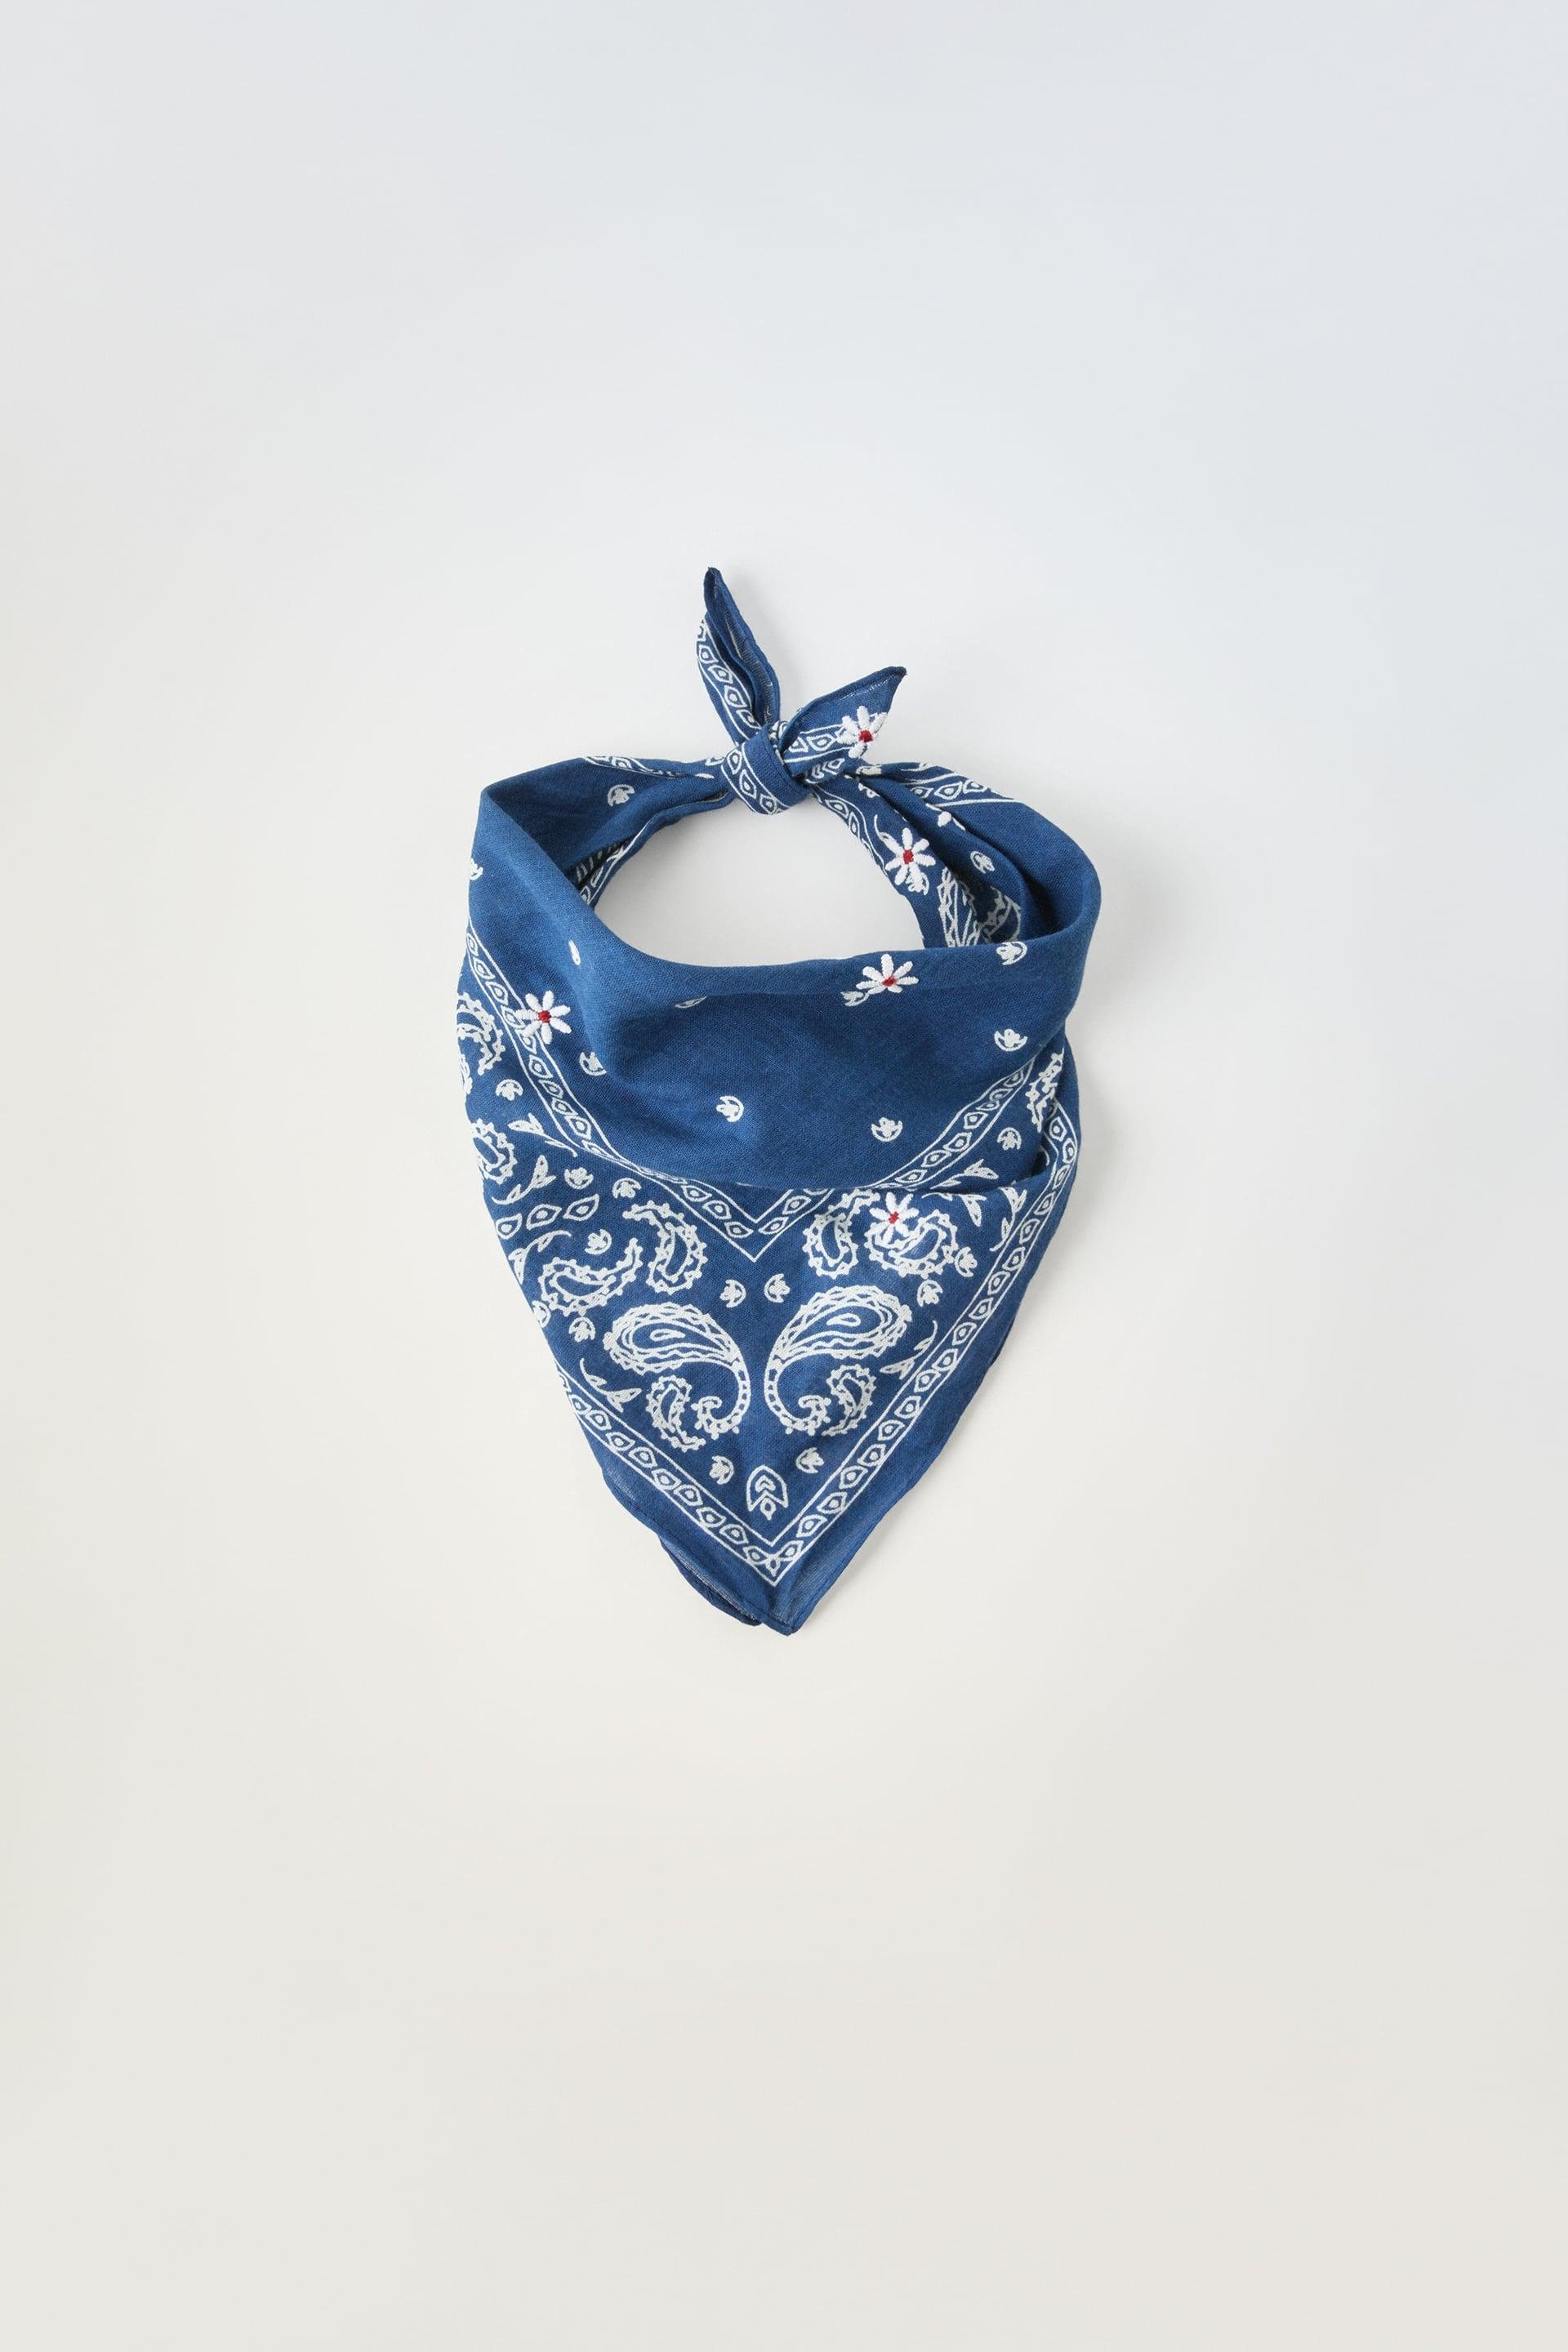 EMBROIDERED FLORAL PRINT BANDANA by ZARA